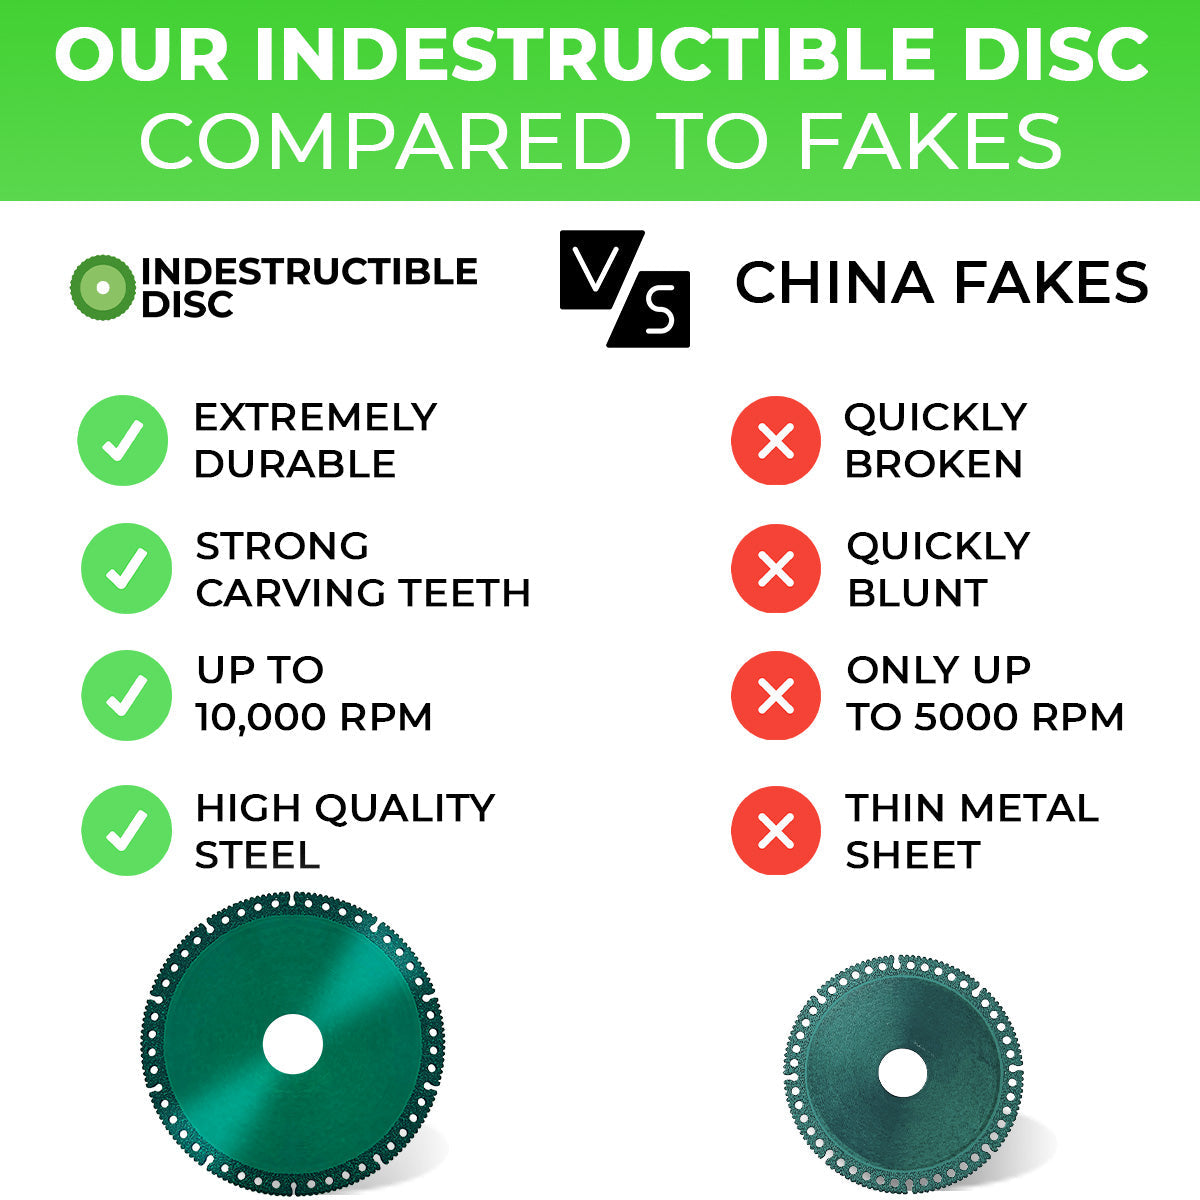 INDESTRUCTIBLE DISC™ 2.0 - Cut everything in seconds